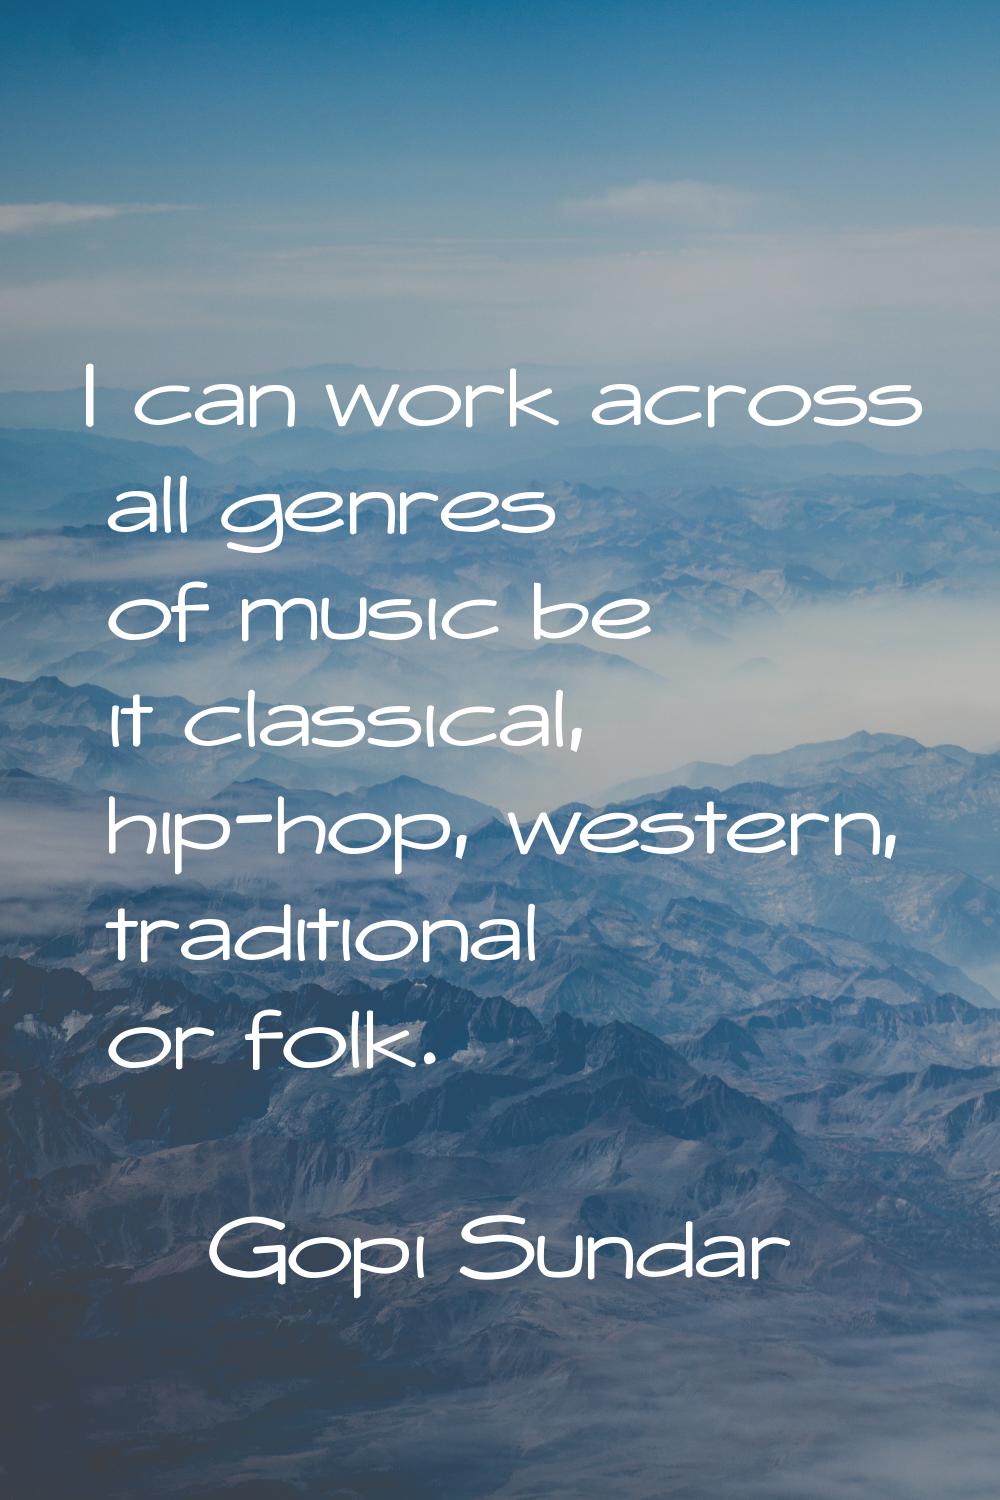 I can work across all genres of music be it classical, hip-hop, western, traditional or folk.